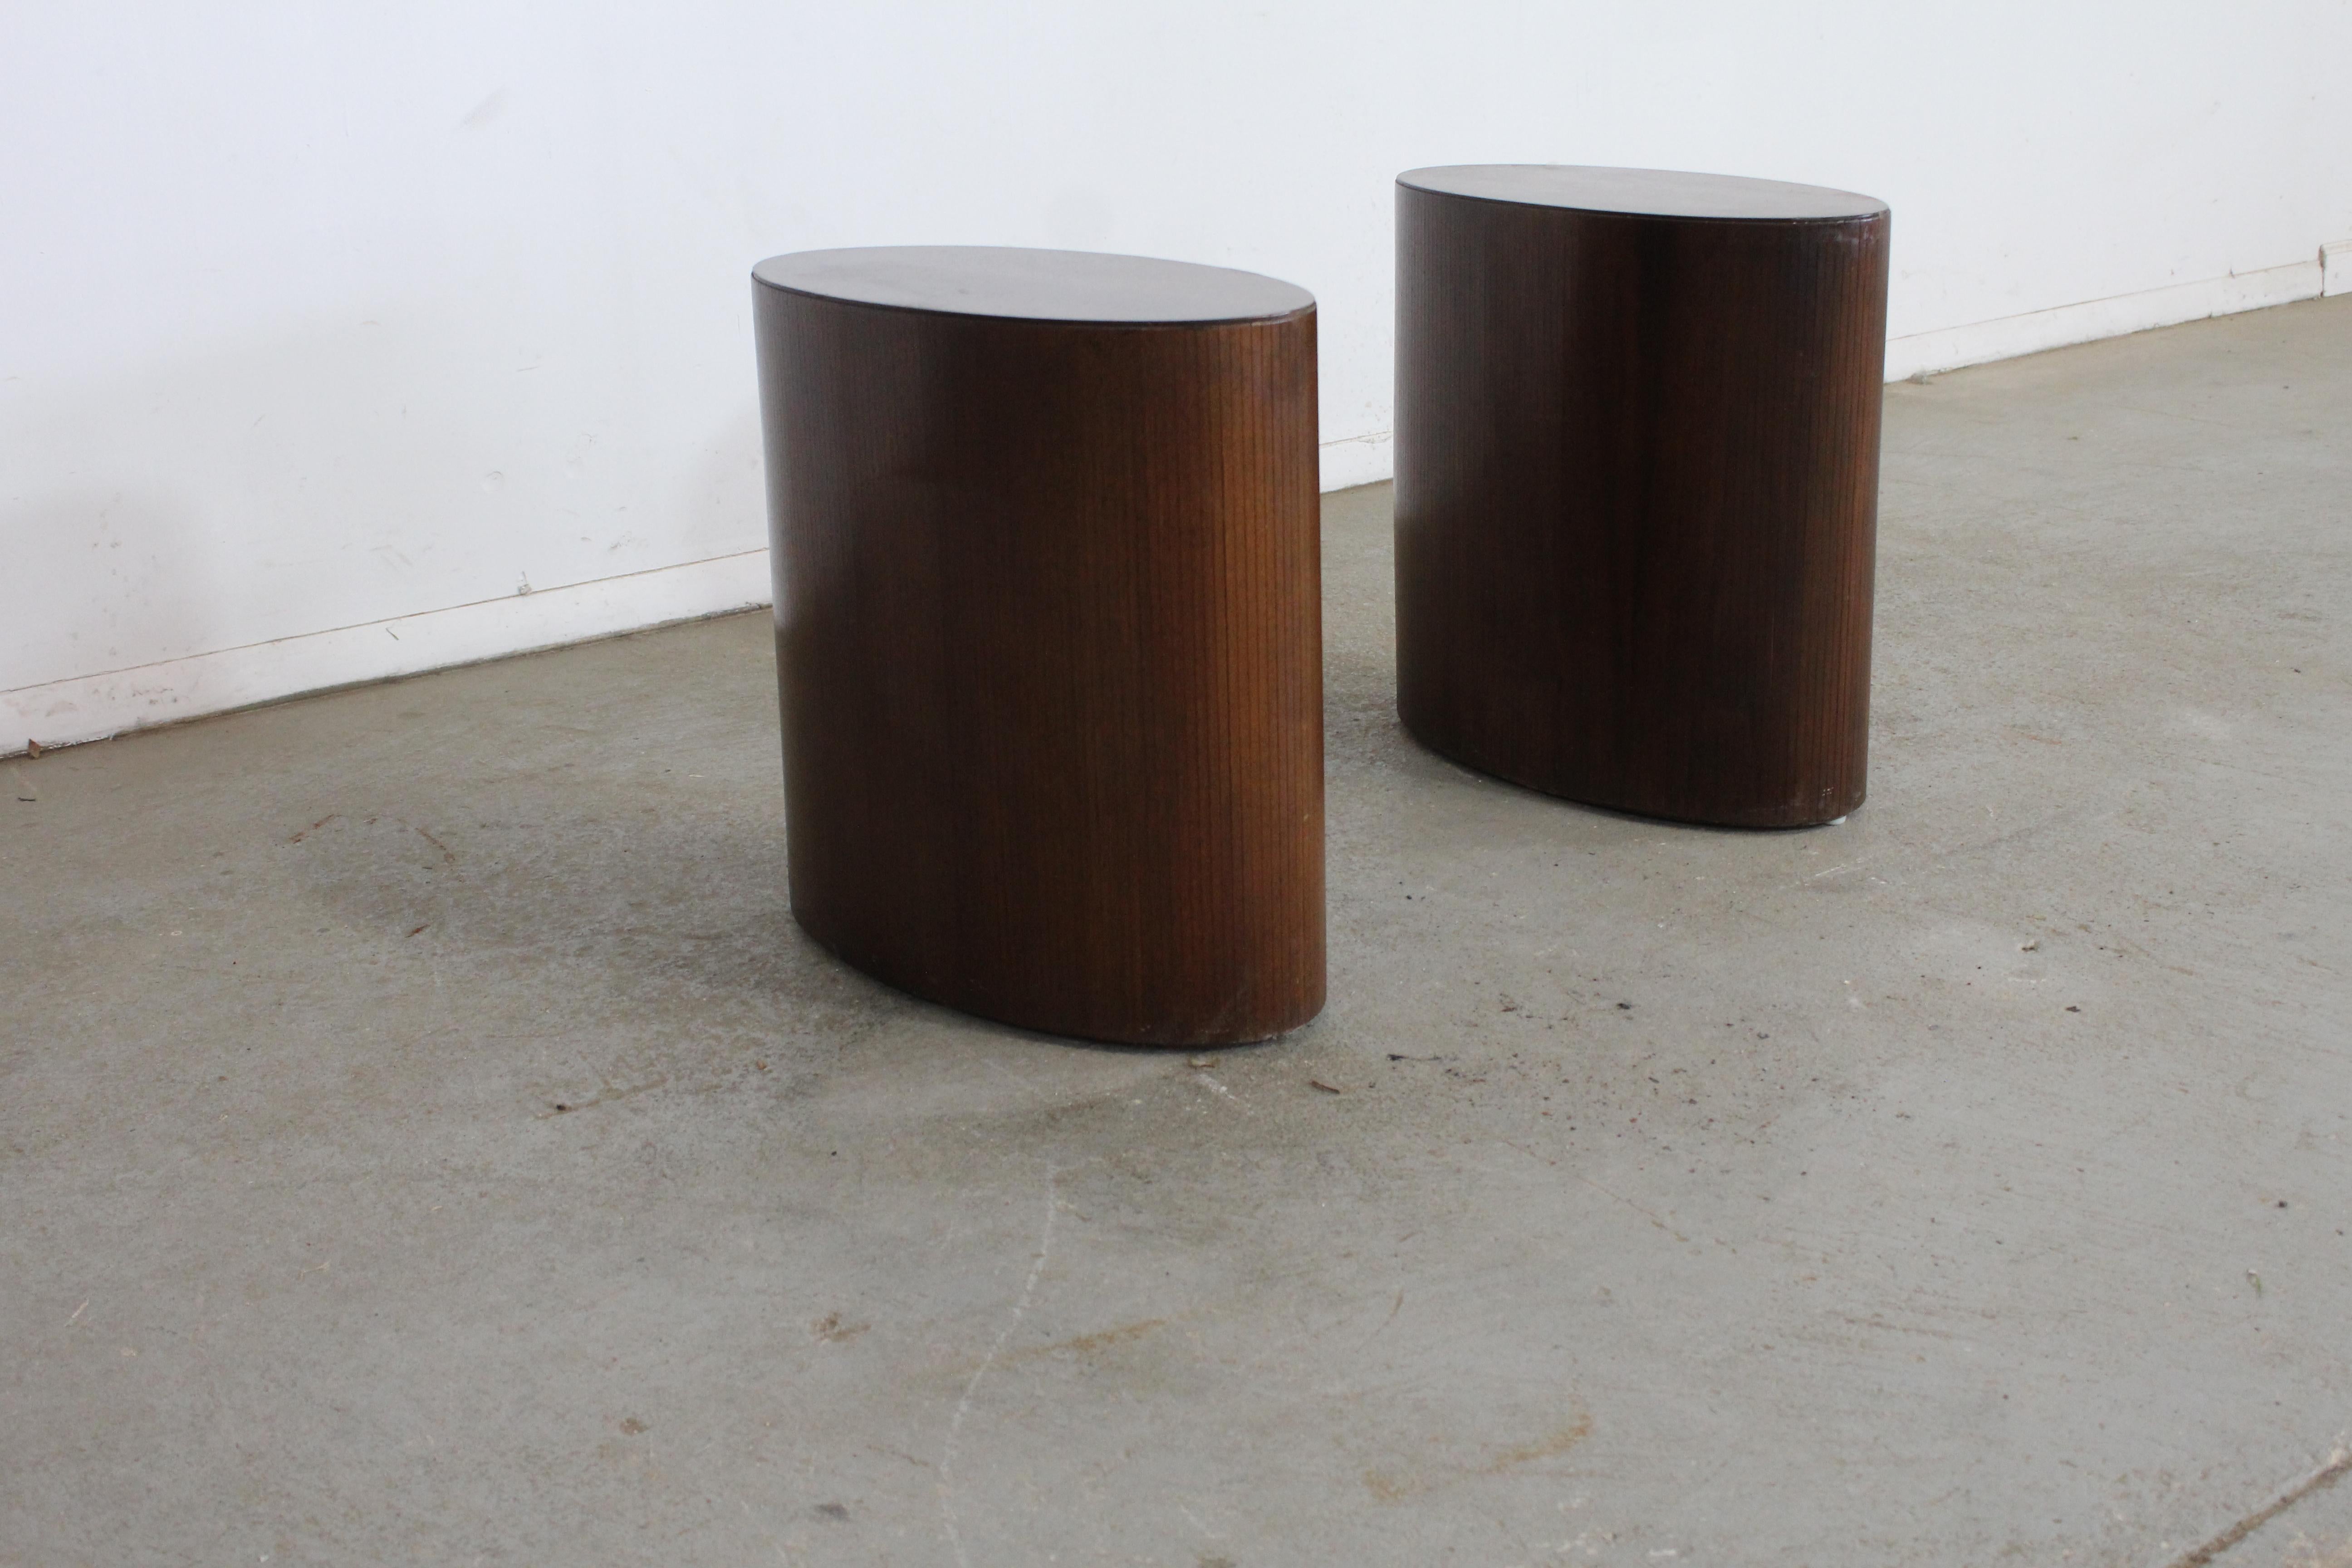 Pair of Mid-Century Modern Oval Walnut Pedestal/Stands/End Table by Lane In Good Condition For Sale In Wilmington, DE